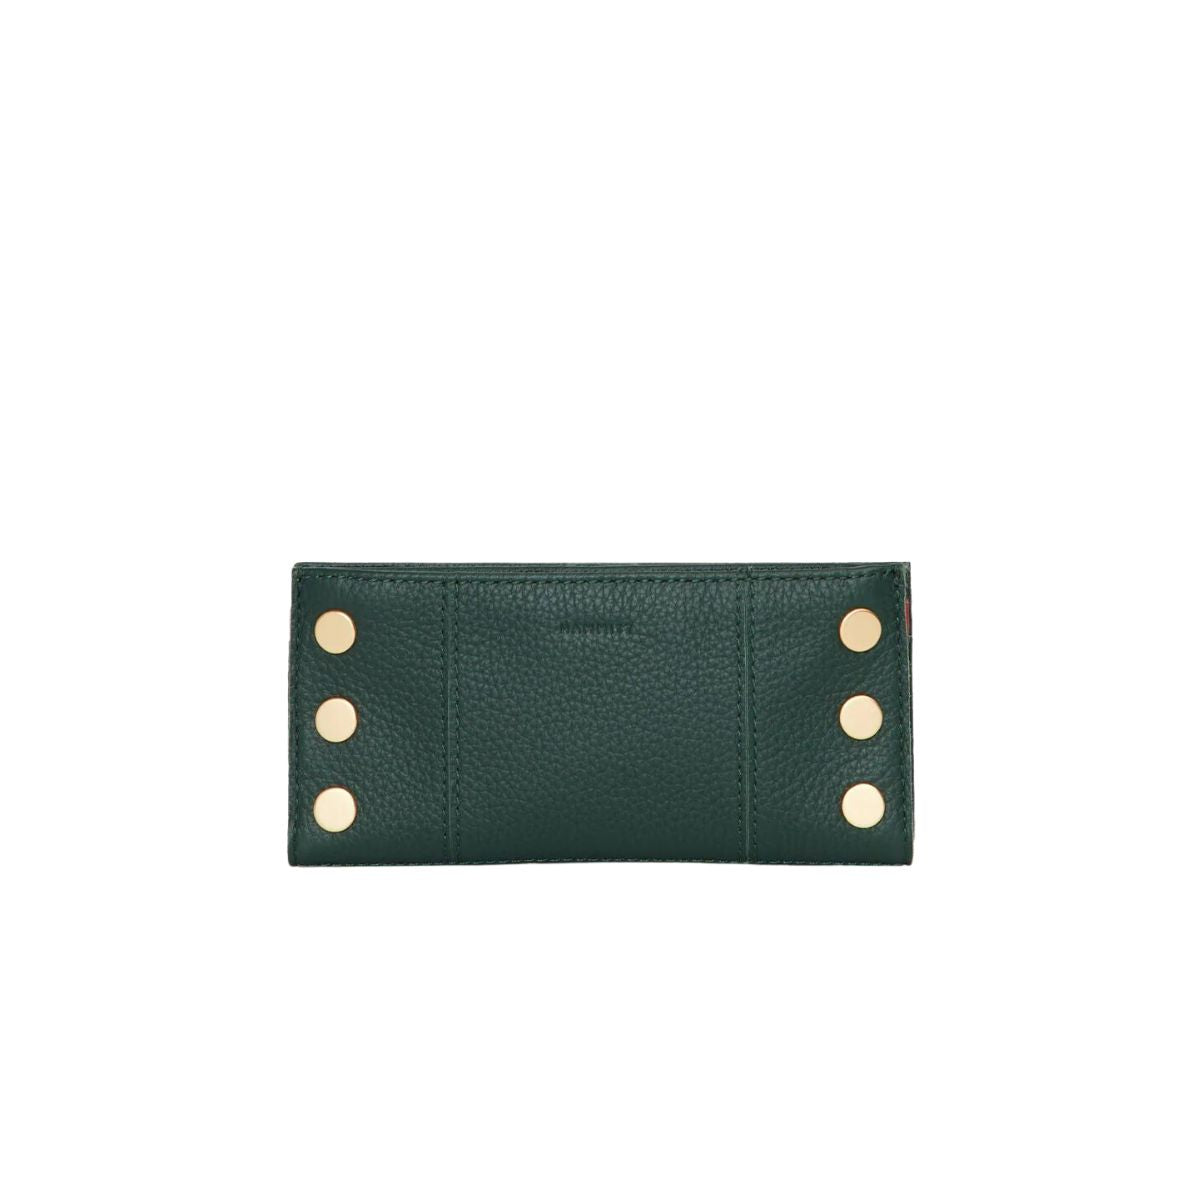 Hammitt 110 North in Grove Green with Brushed Gold